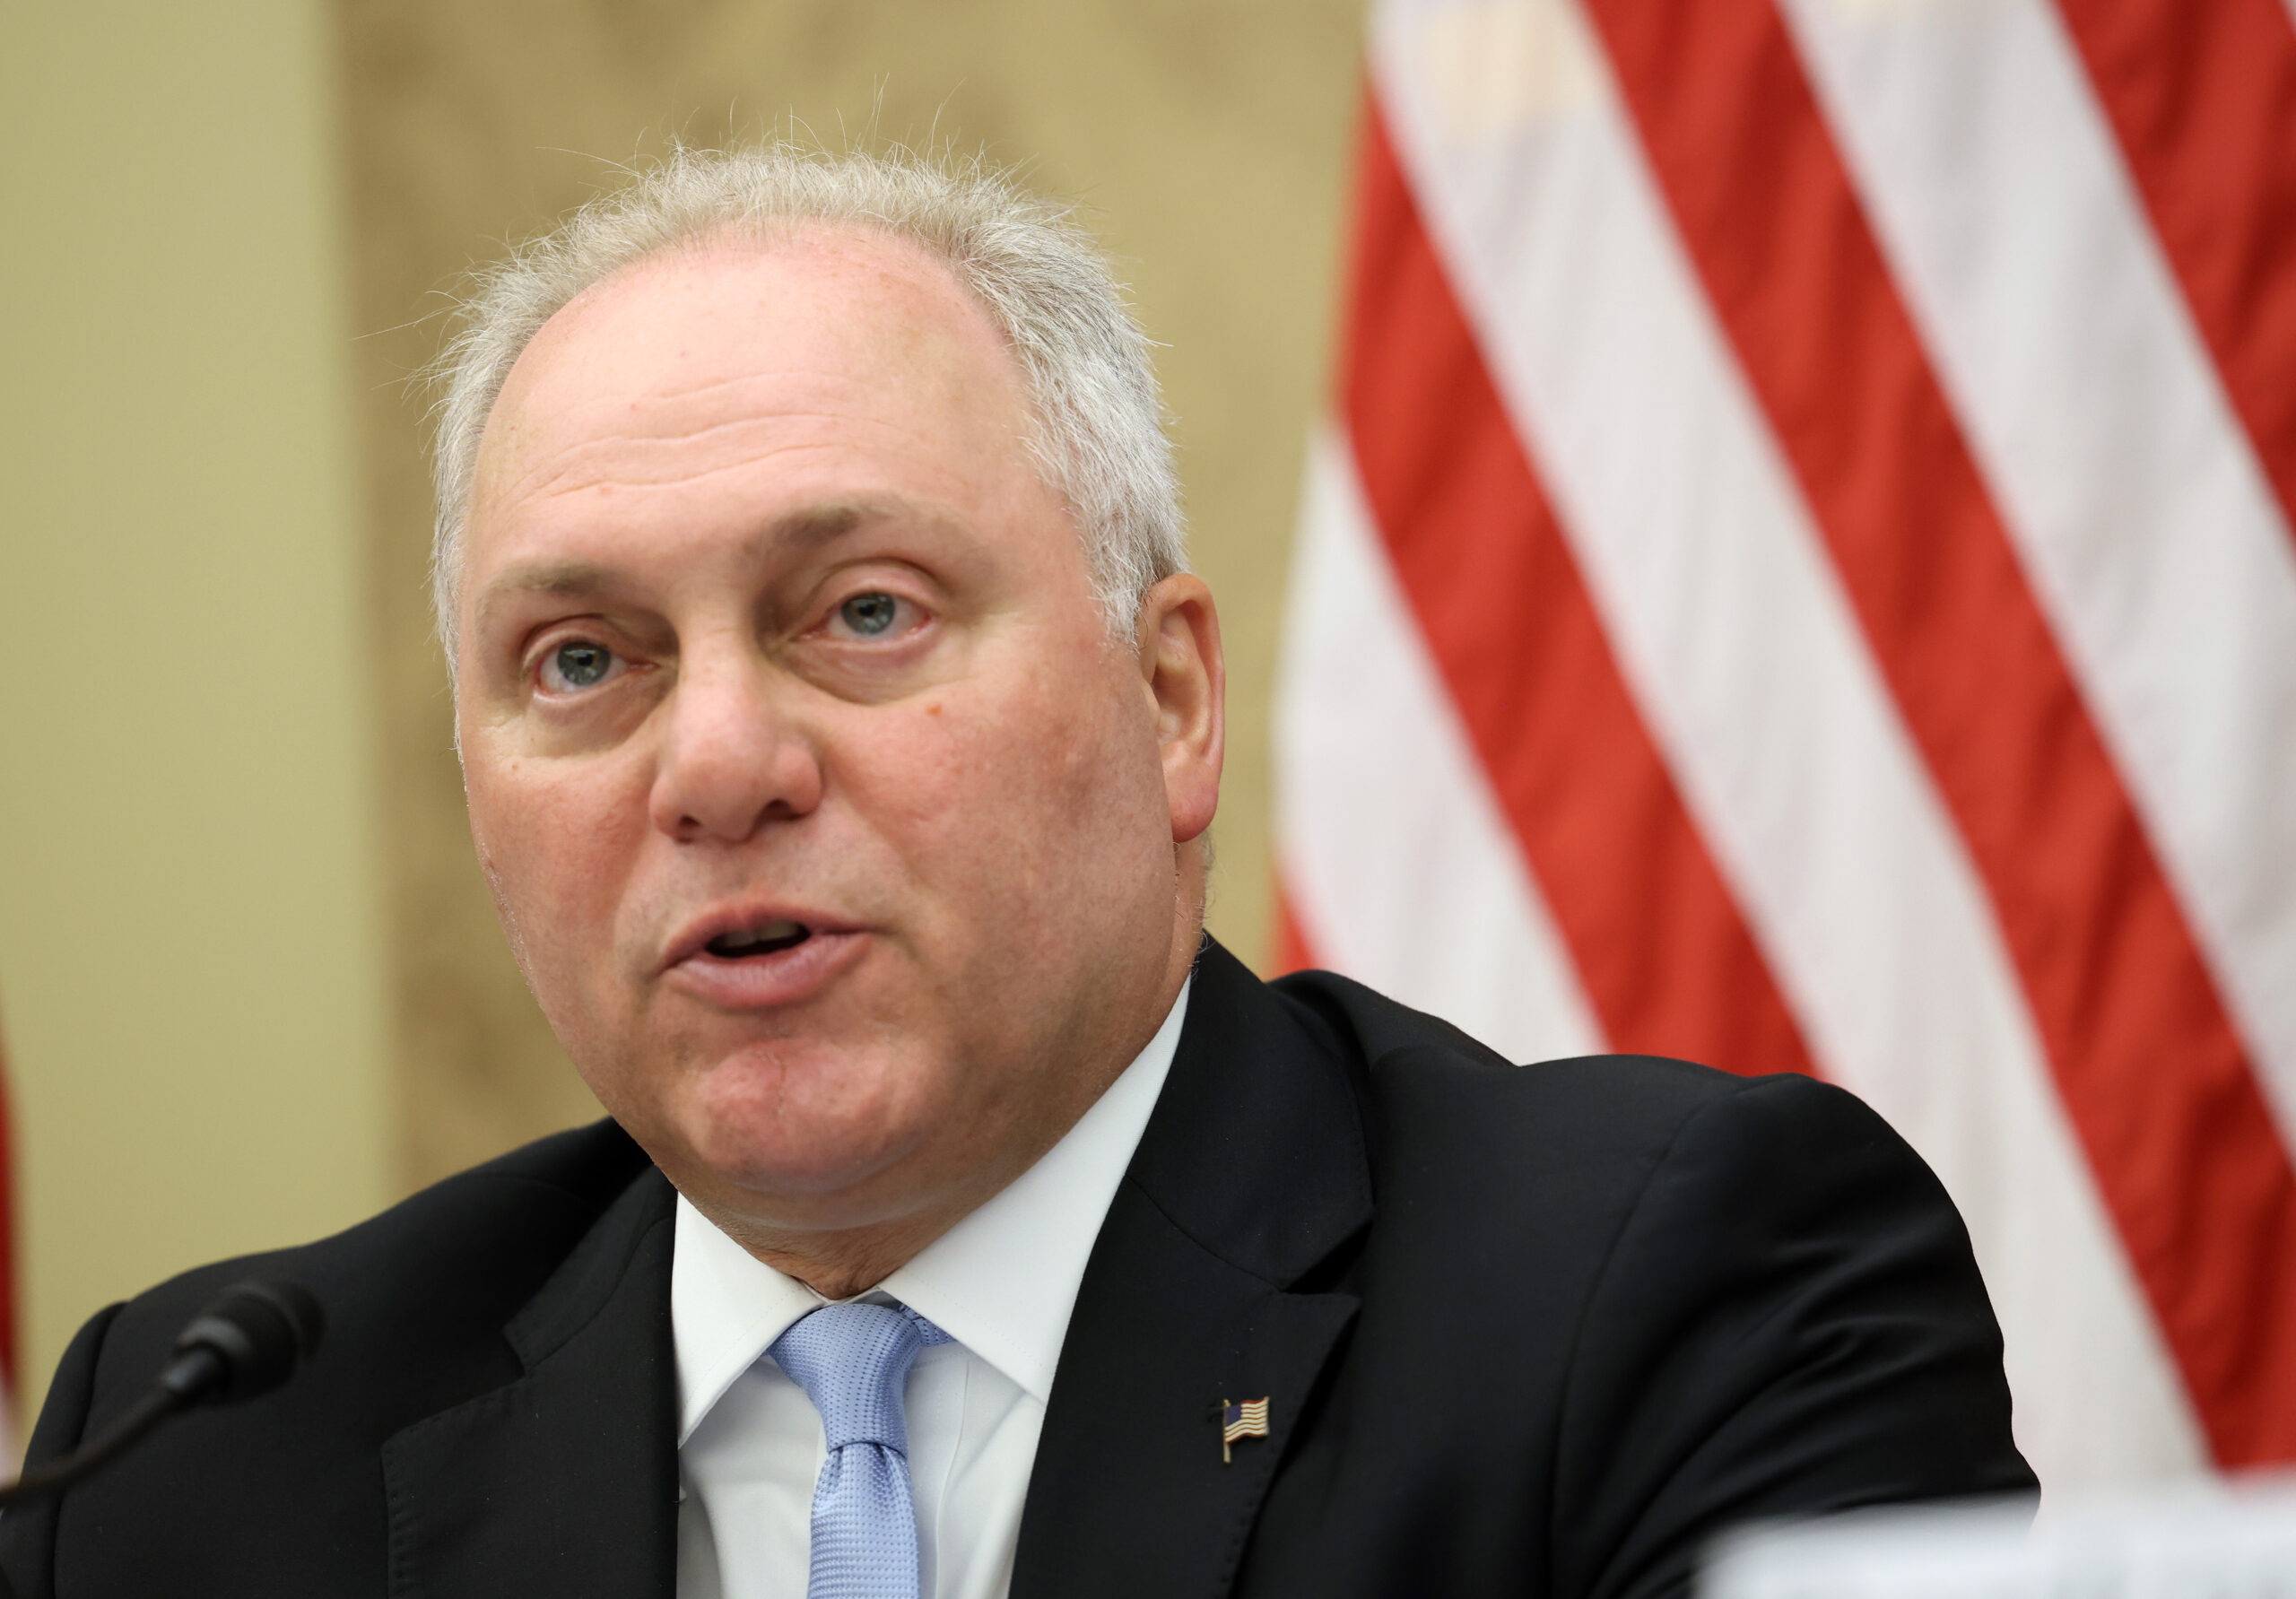 U.S. Rep. Steve Scalise (R-La.) delivers remarks during a Republican-led forum on the origins of the COVID-19 virus at the U.S. Capitol on June 29, 2021 in Washington, DC. The forum examined the theory that the coronavirus came from a lab in Wuhan, China. (Photo by Kevin Dietsch/Getty Images)